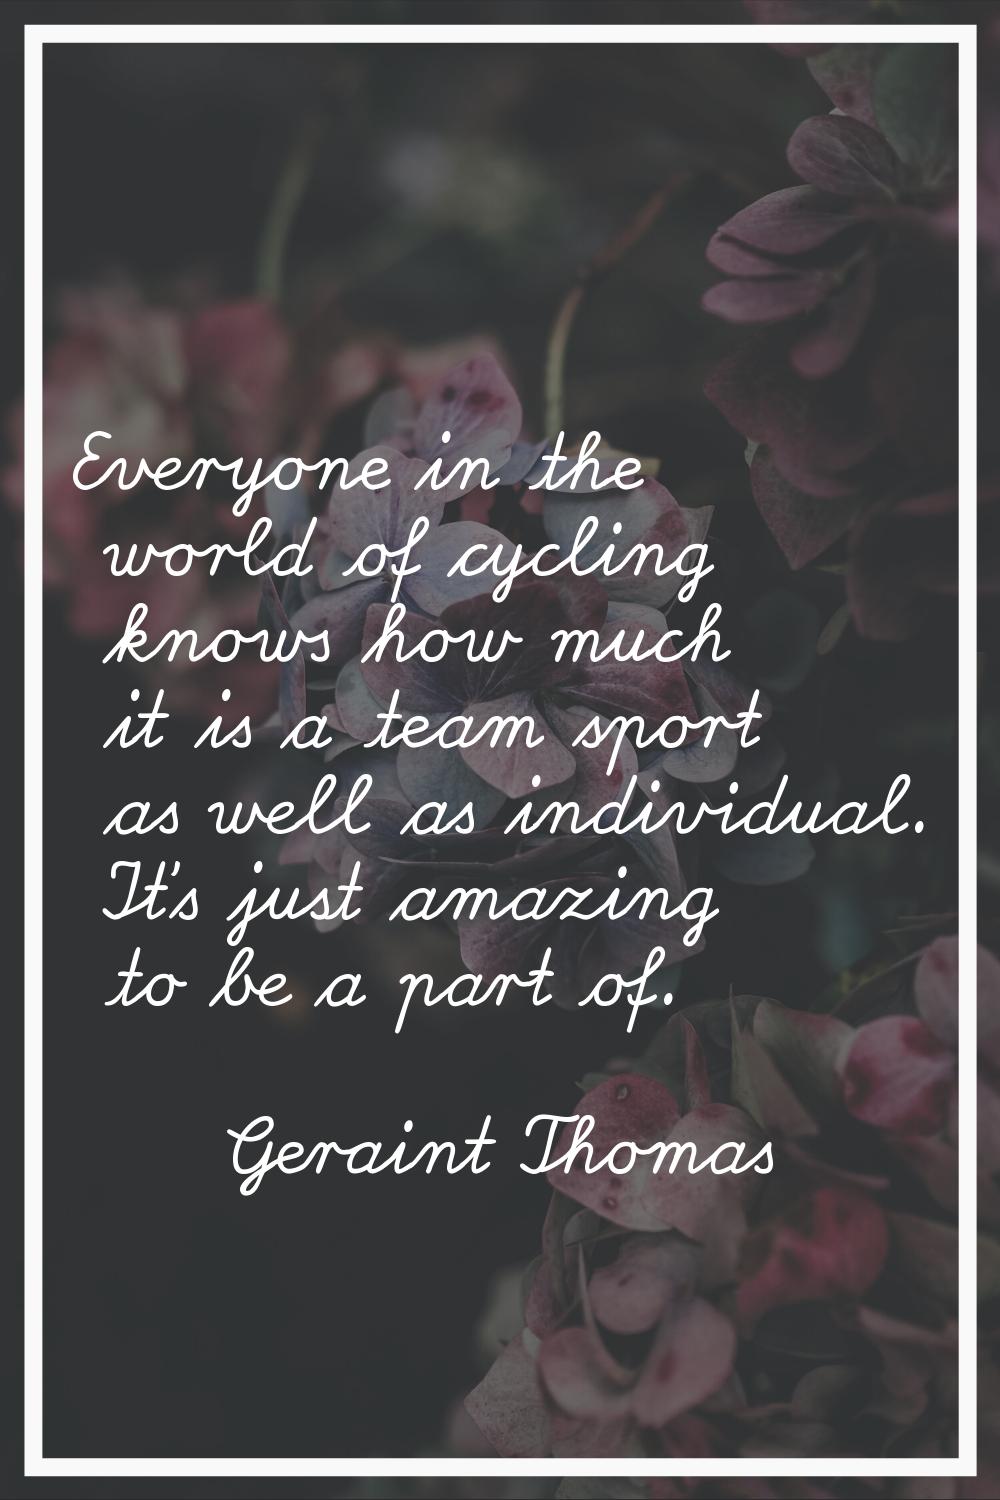 Everyone in the world of cycling knows how much it is a team sport as well as individual. It's just